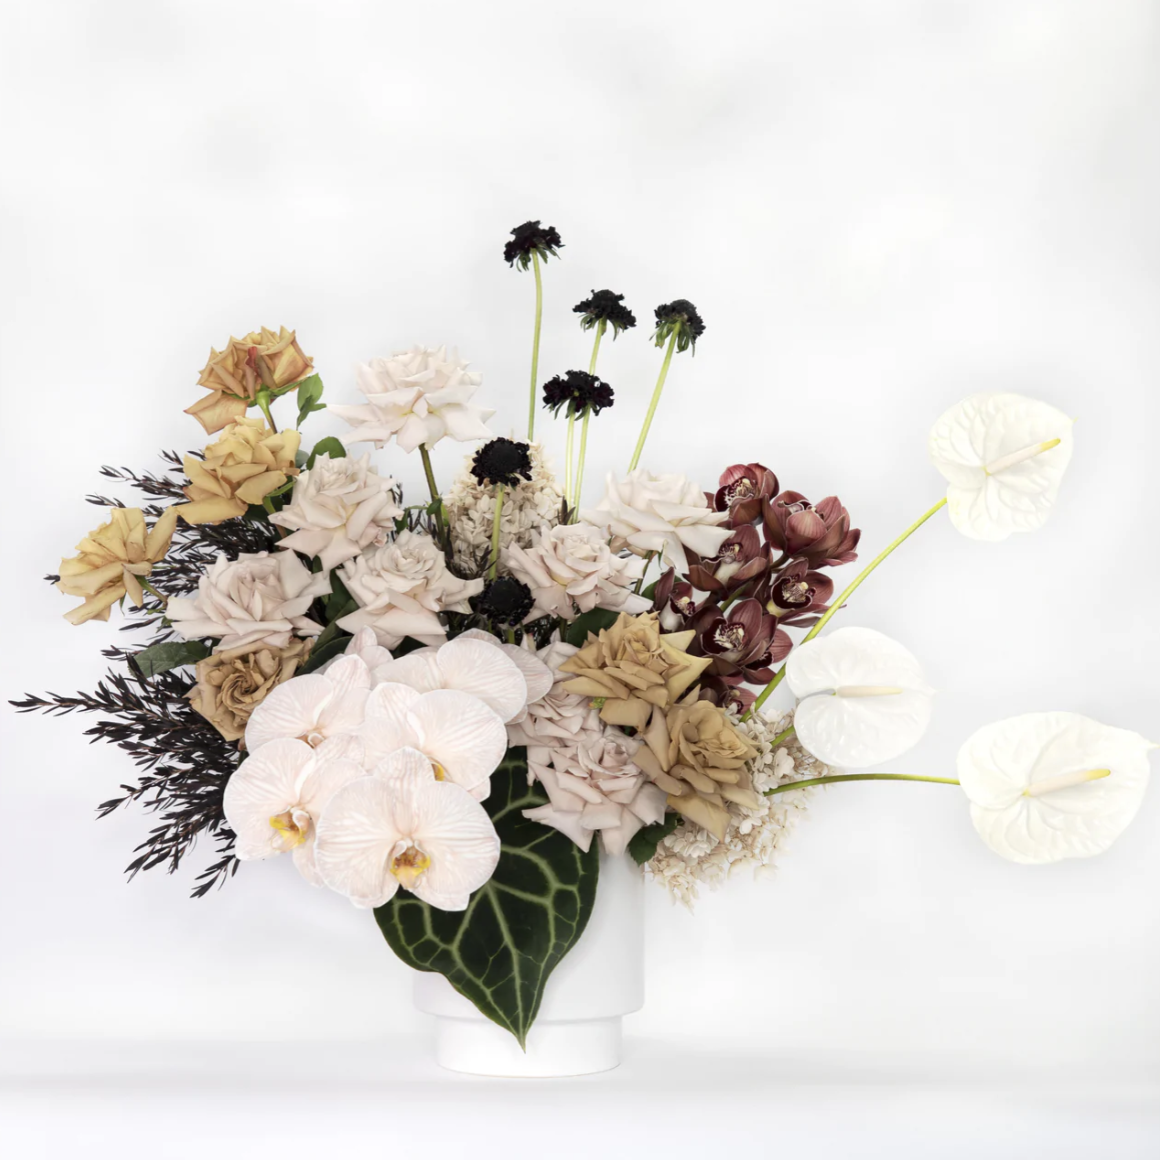 10 Beautiful Message Examples for Funeral Flowers